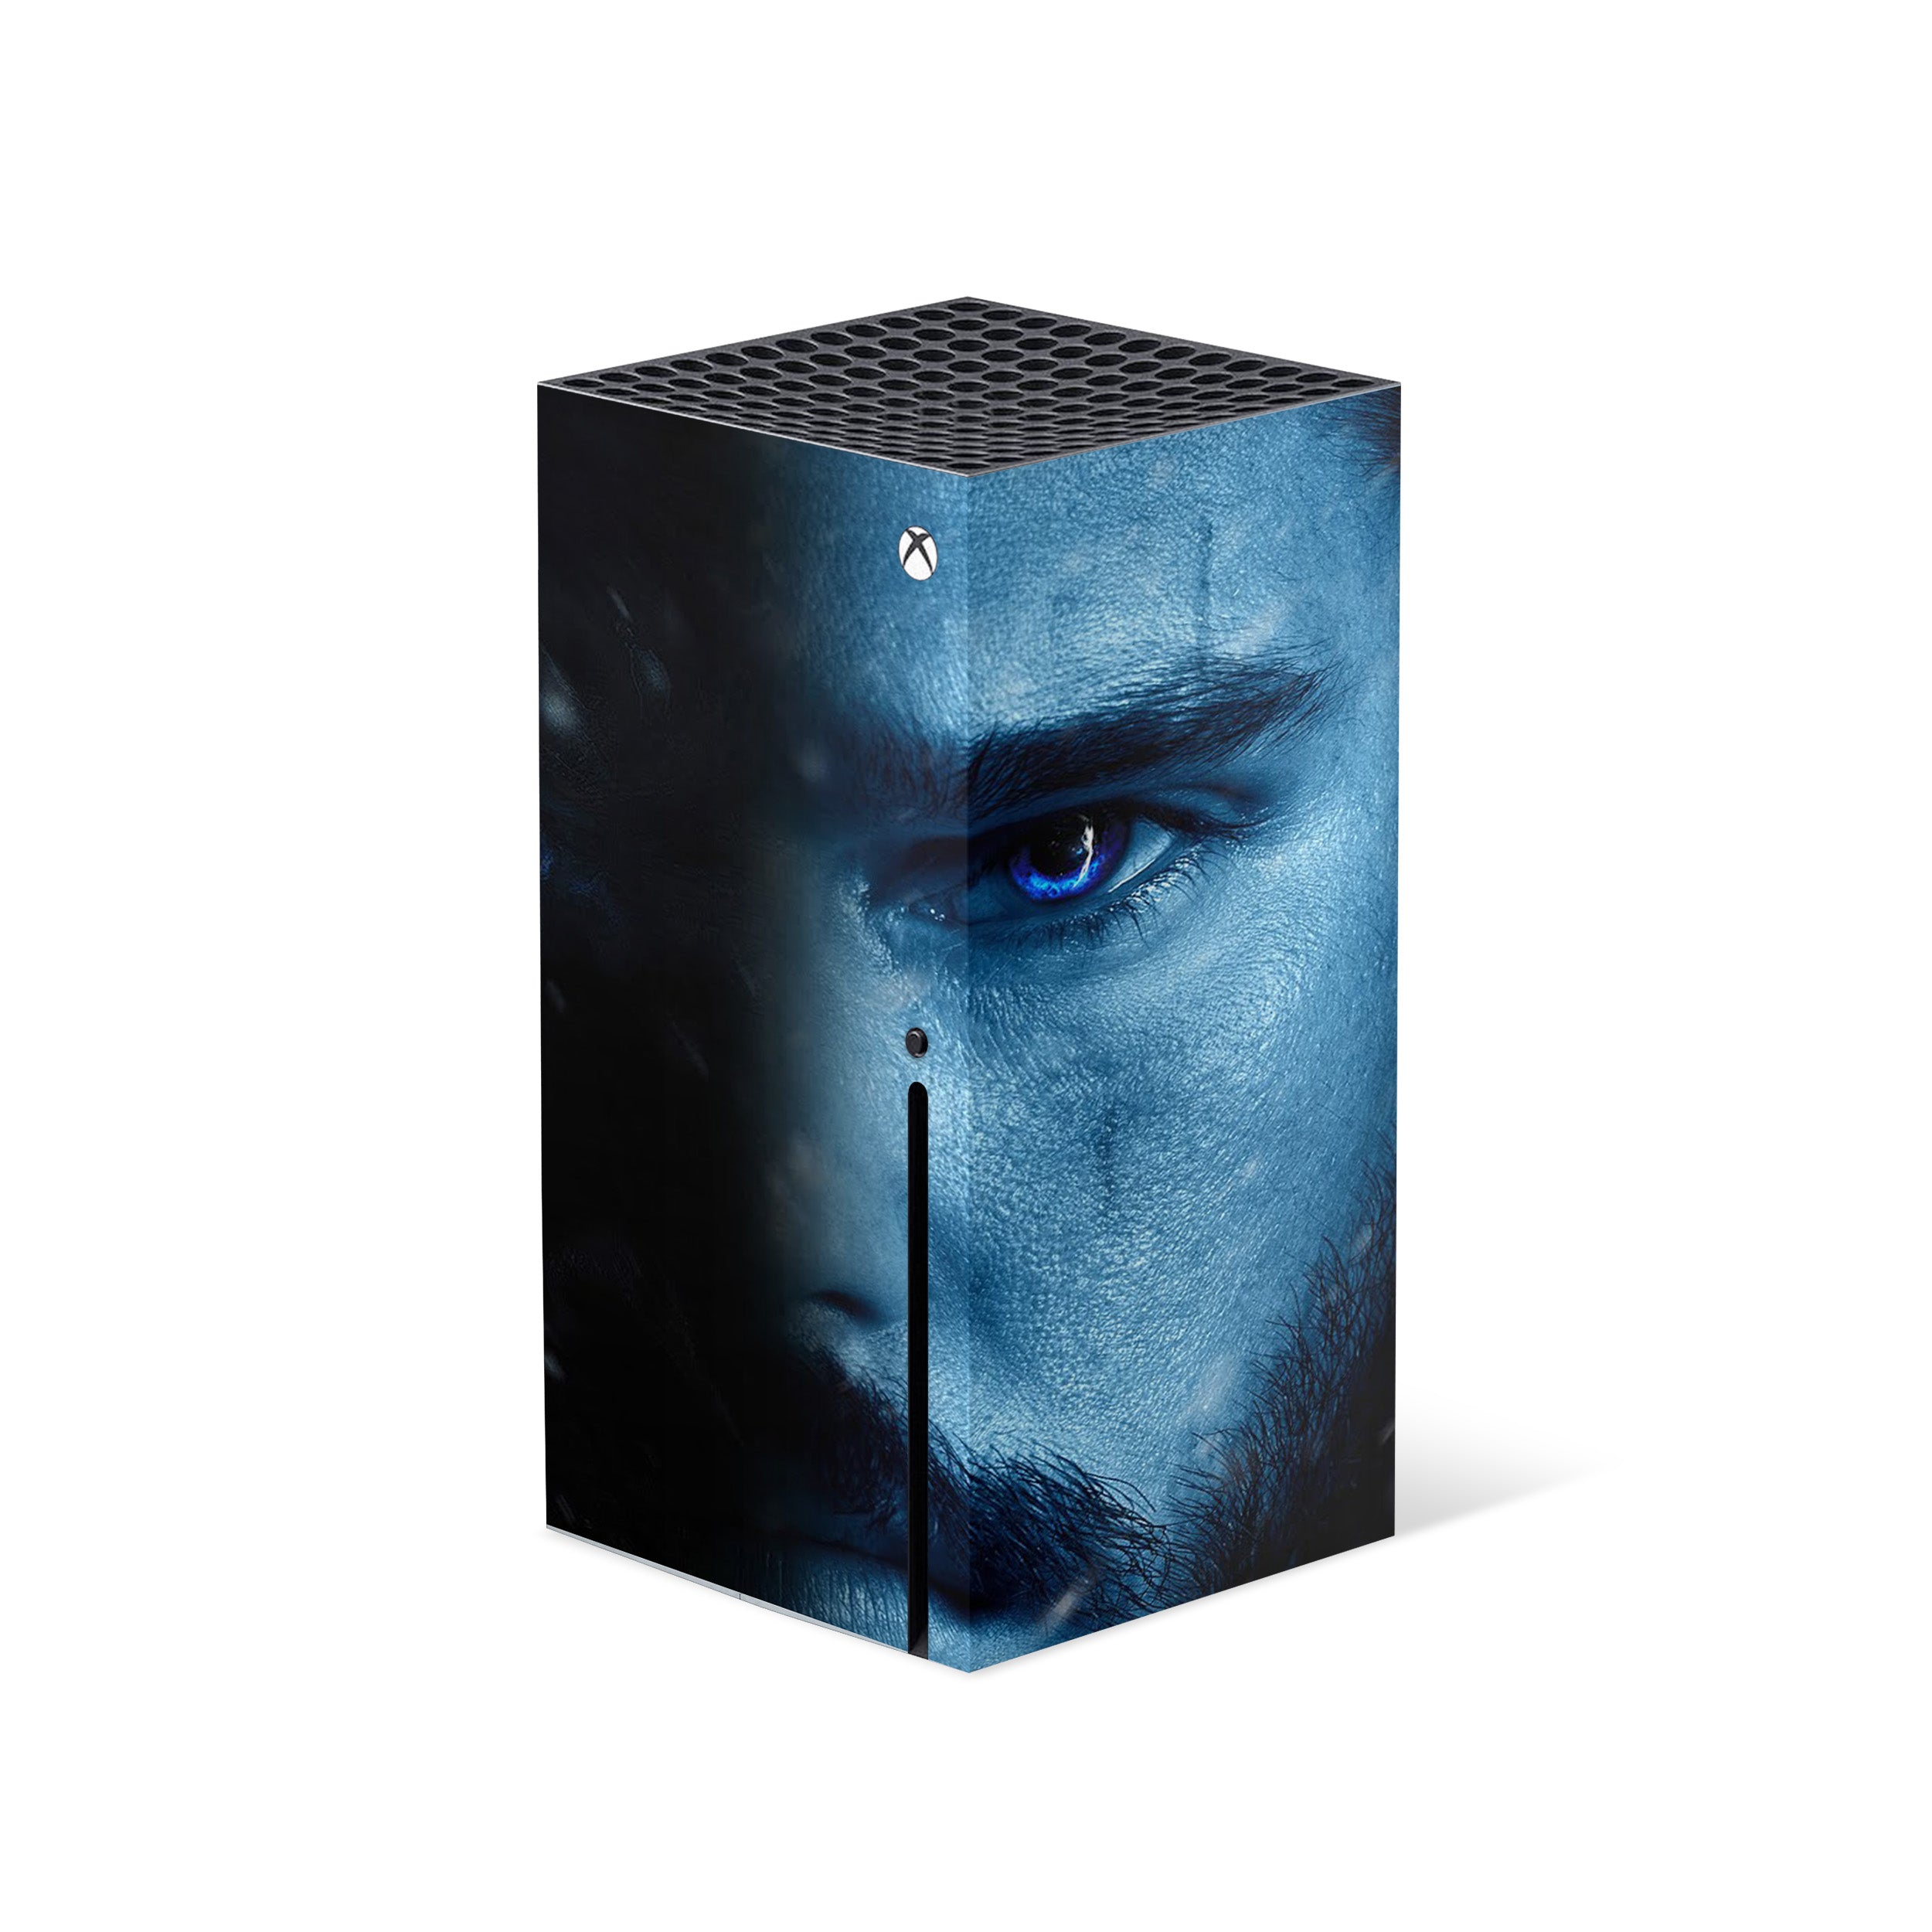 A video game skin featuring a Game Of Thrones Jon Snow design for the Xbox Series X.